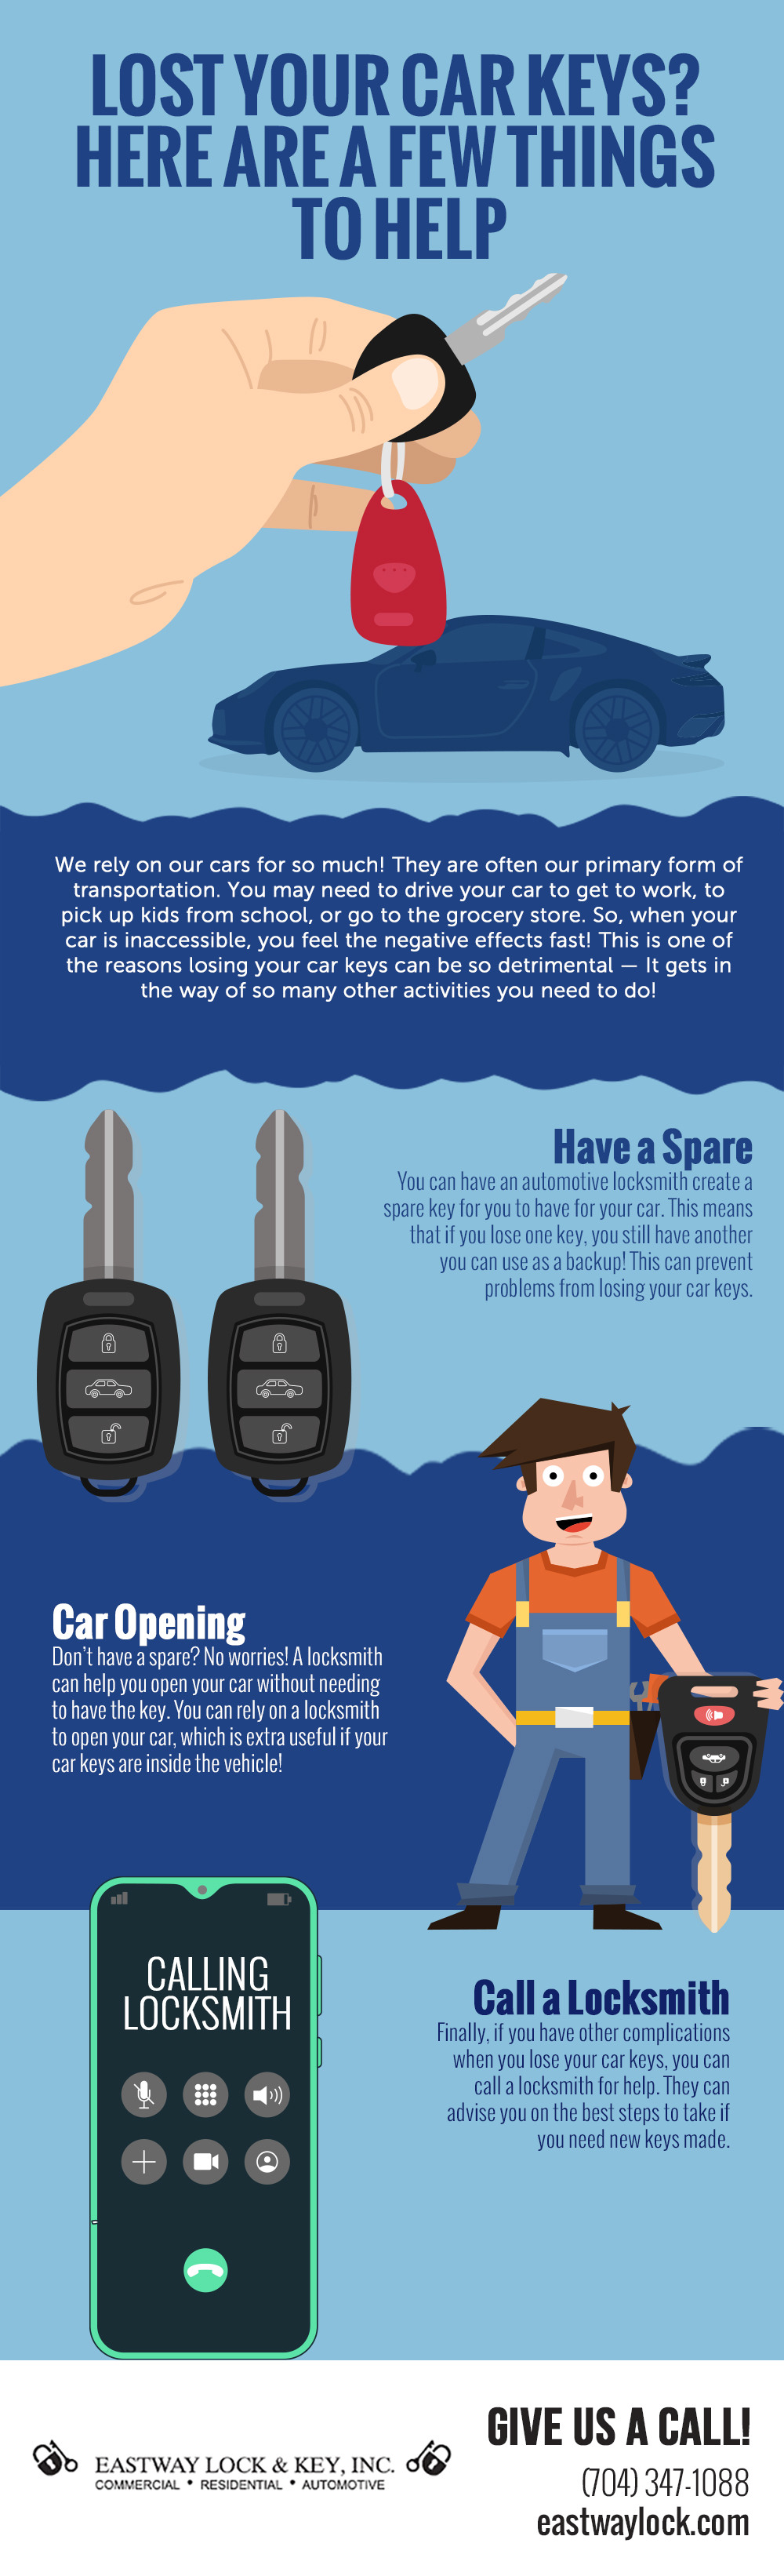  Lost Your Car Keys? Here are a Few Things to Help [infographic]